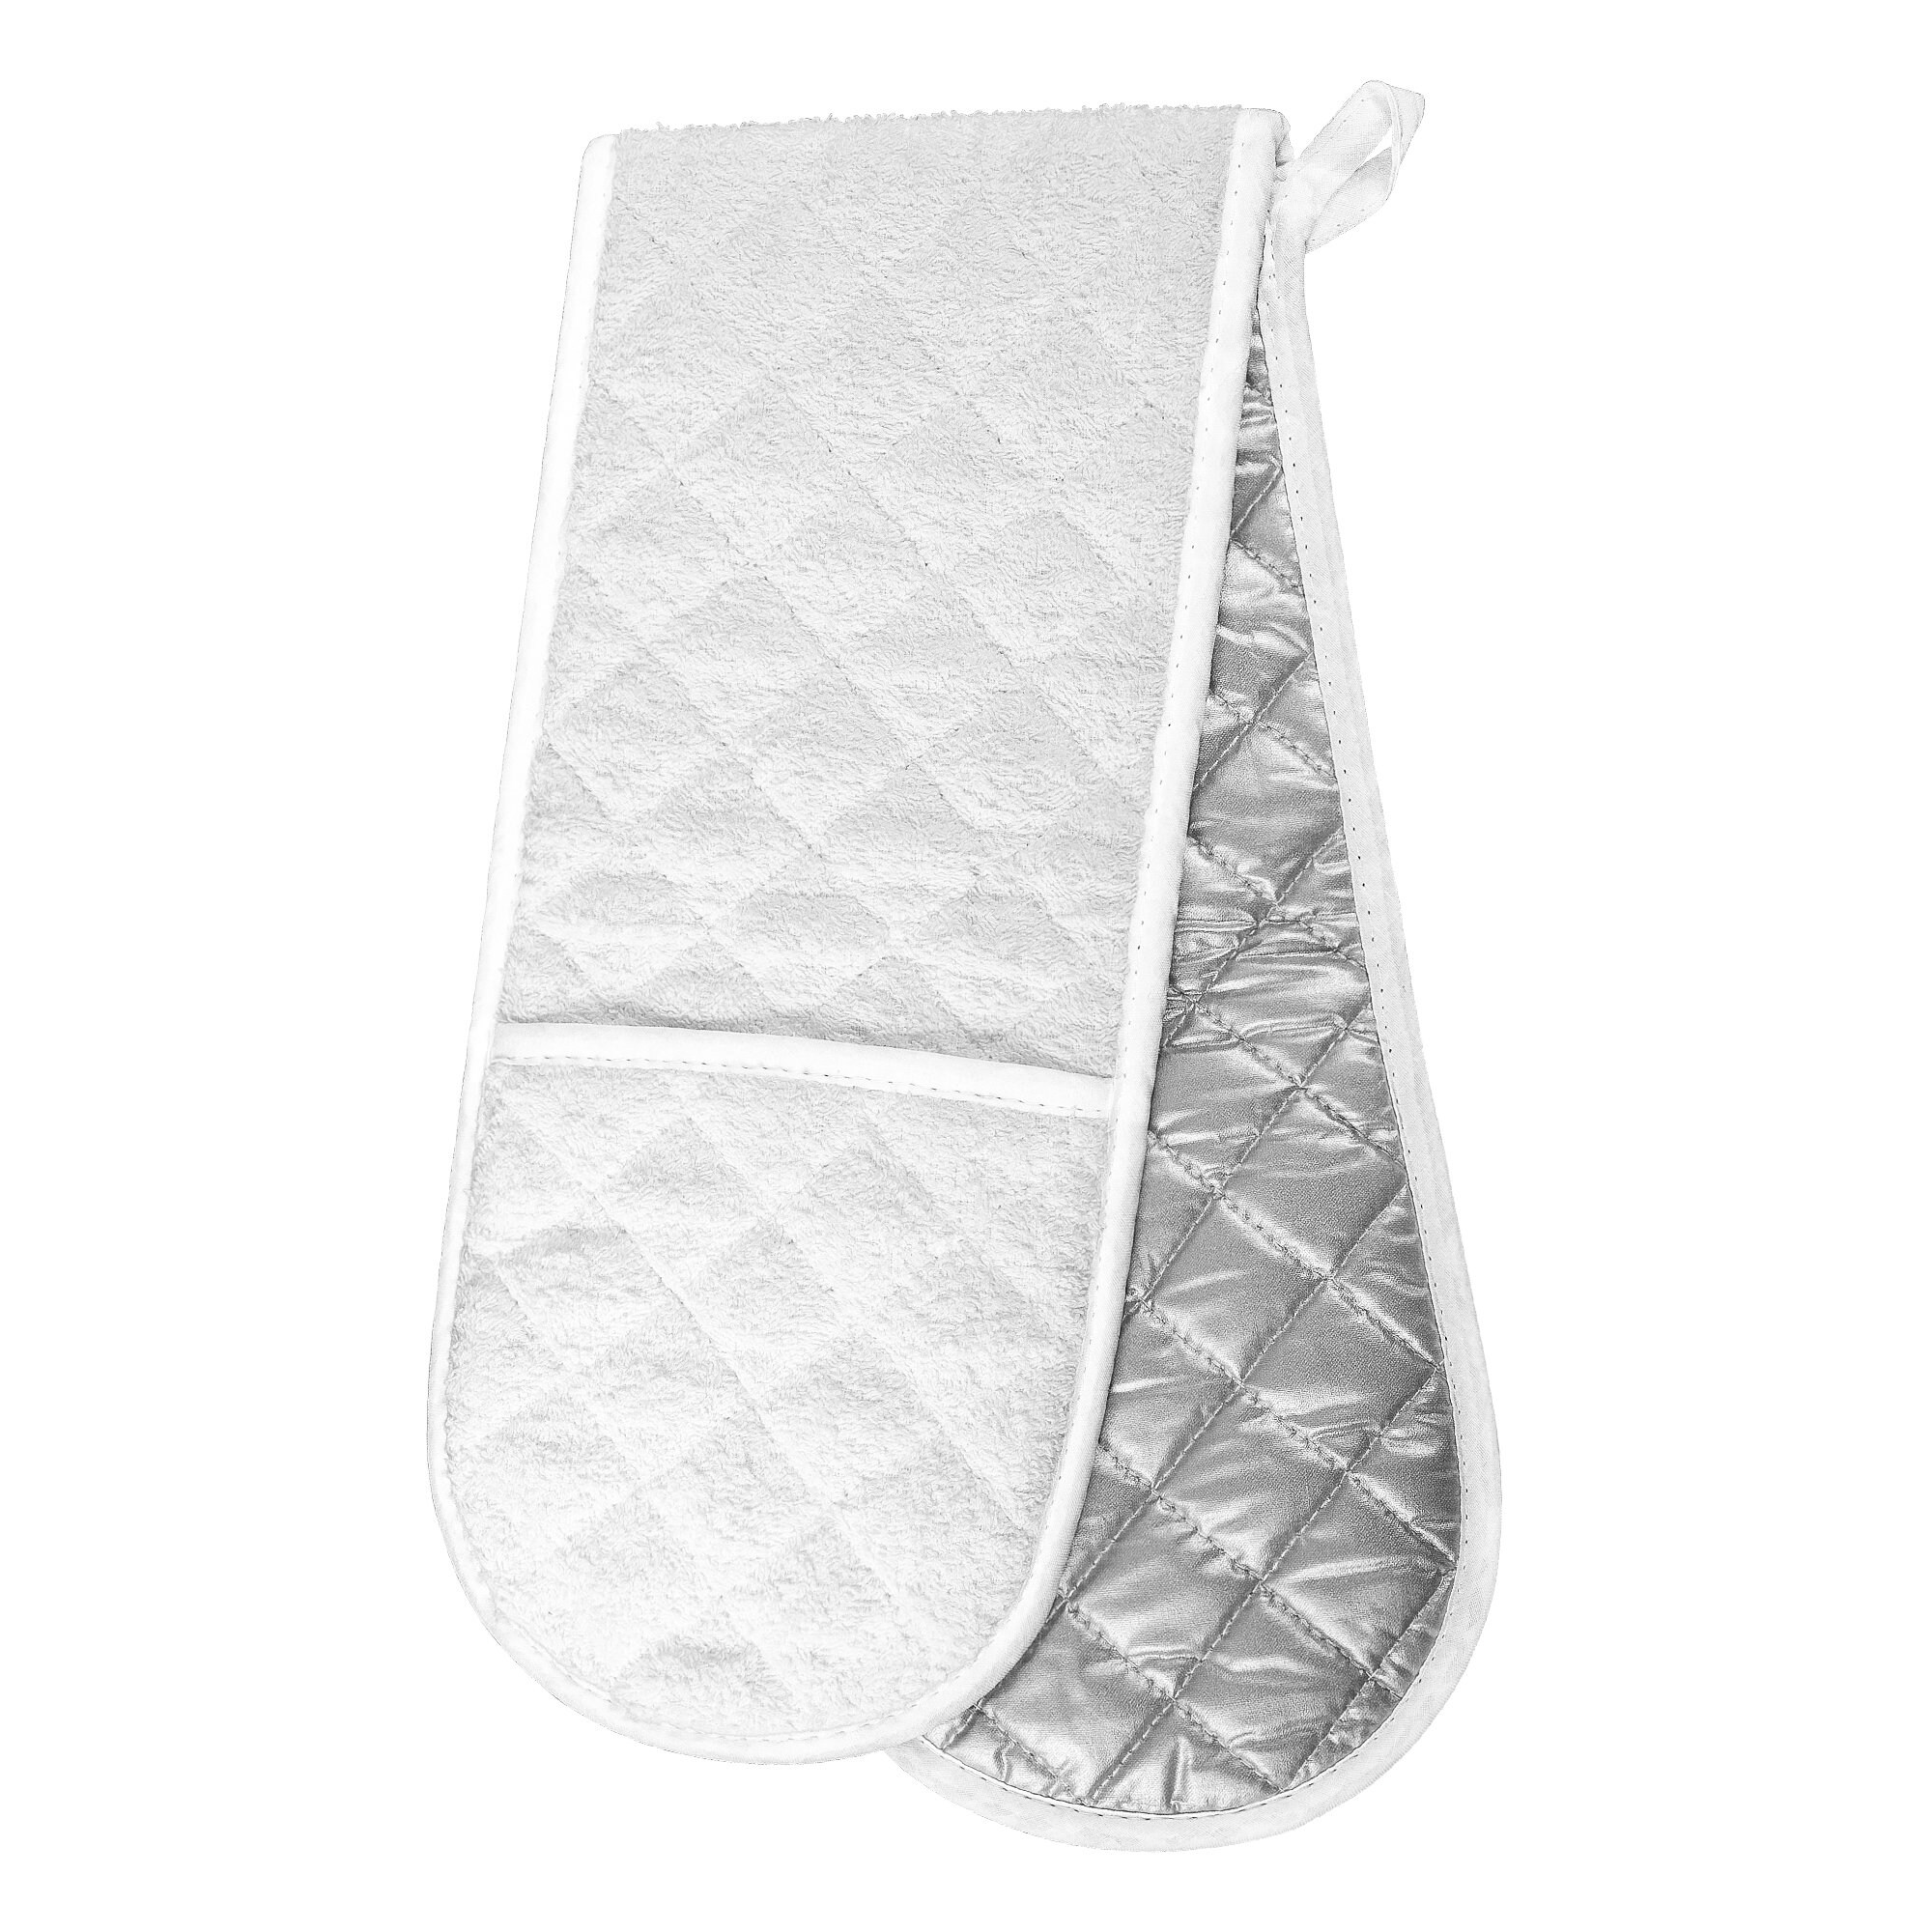 Double Oven Mitts, Kitchen Long Oven Mitts, Super Long Heat-resistant Gloves  for Kitchen Cooking 